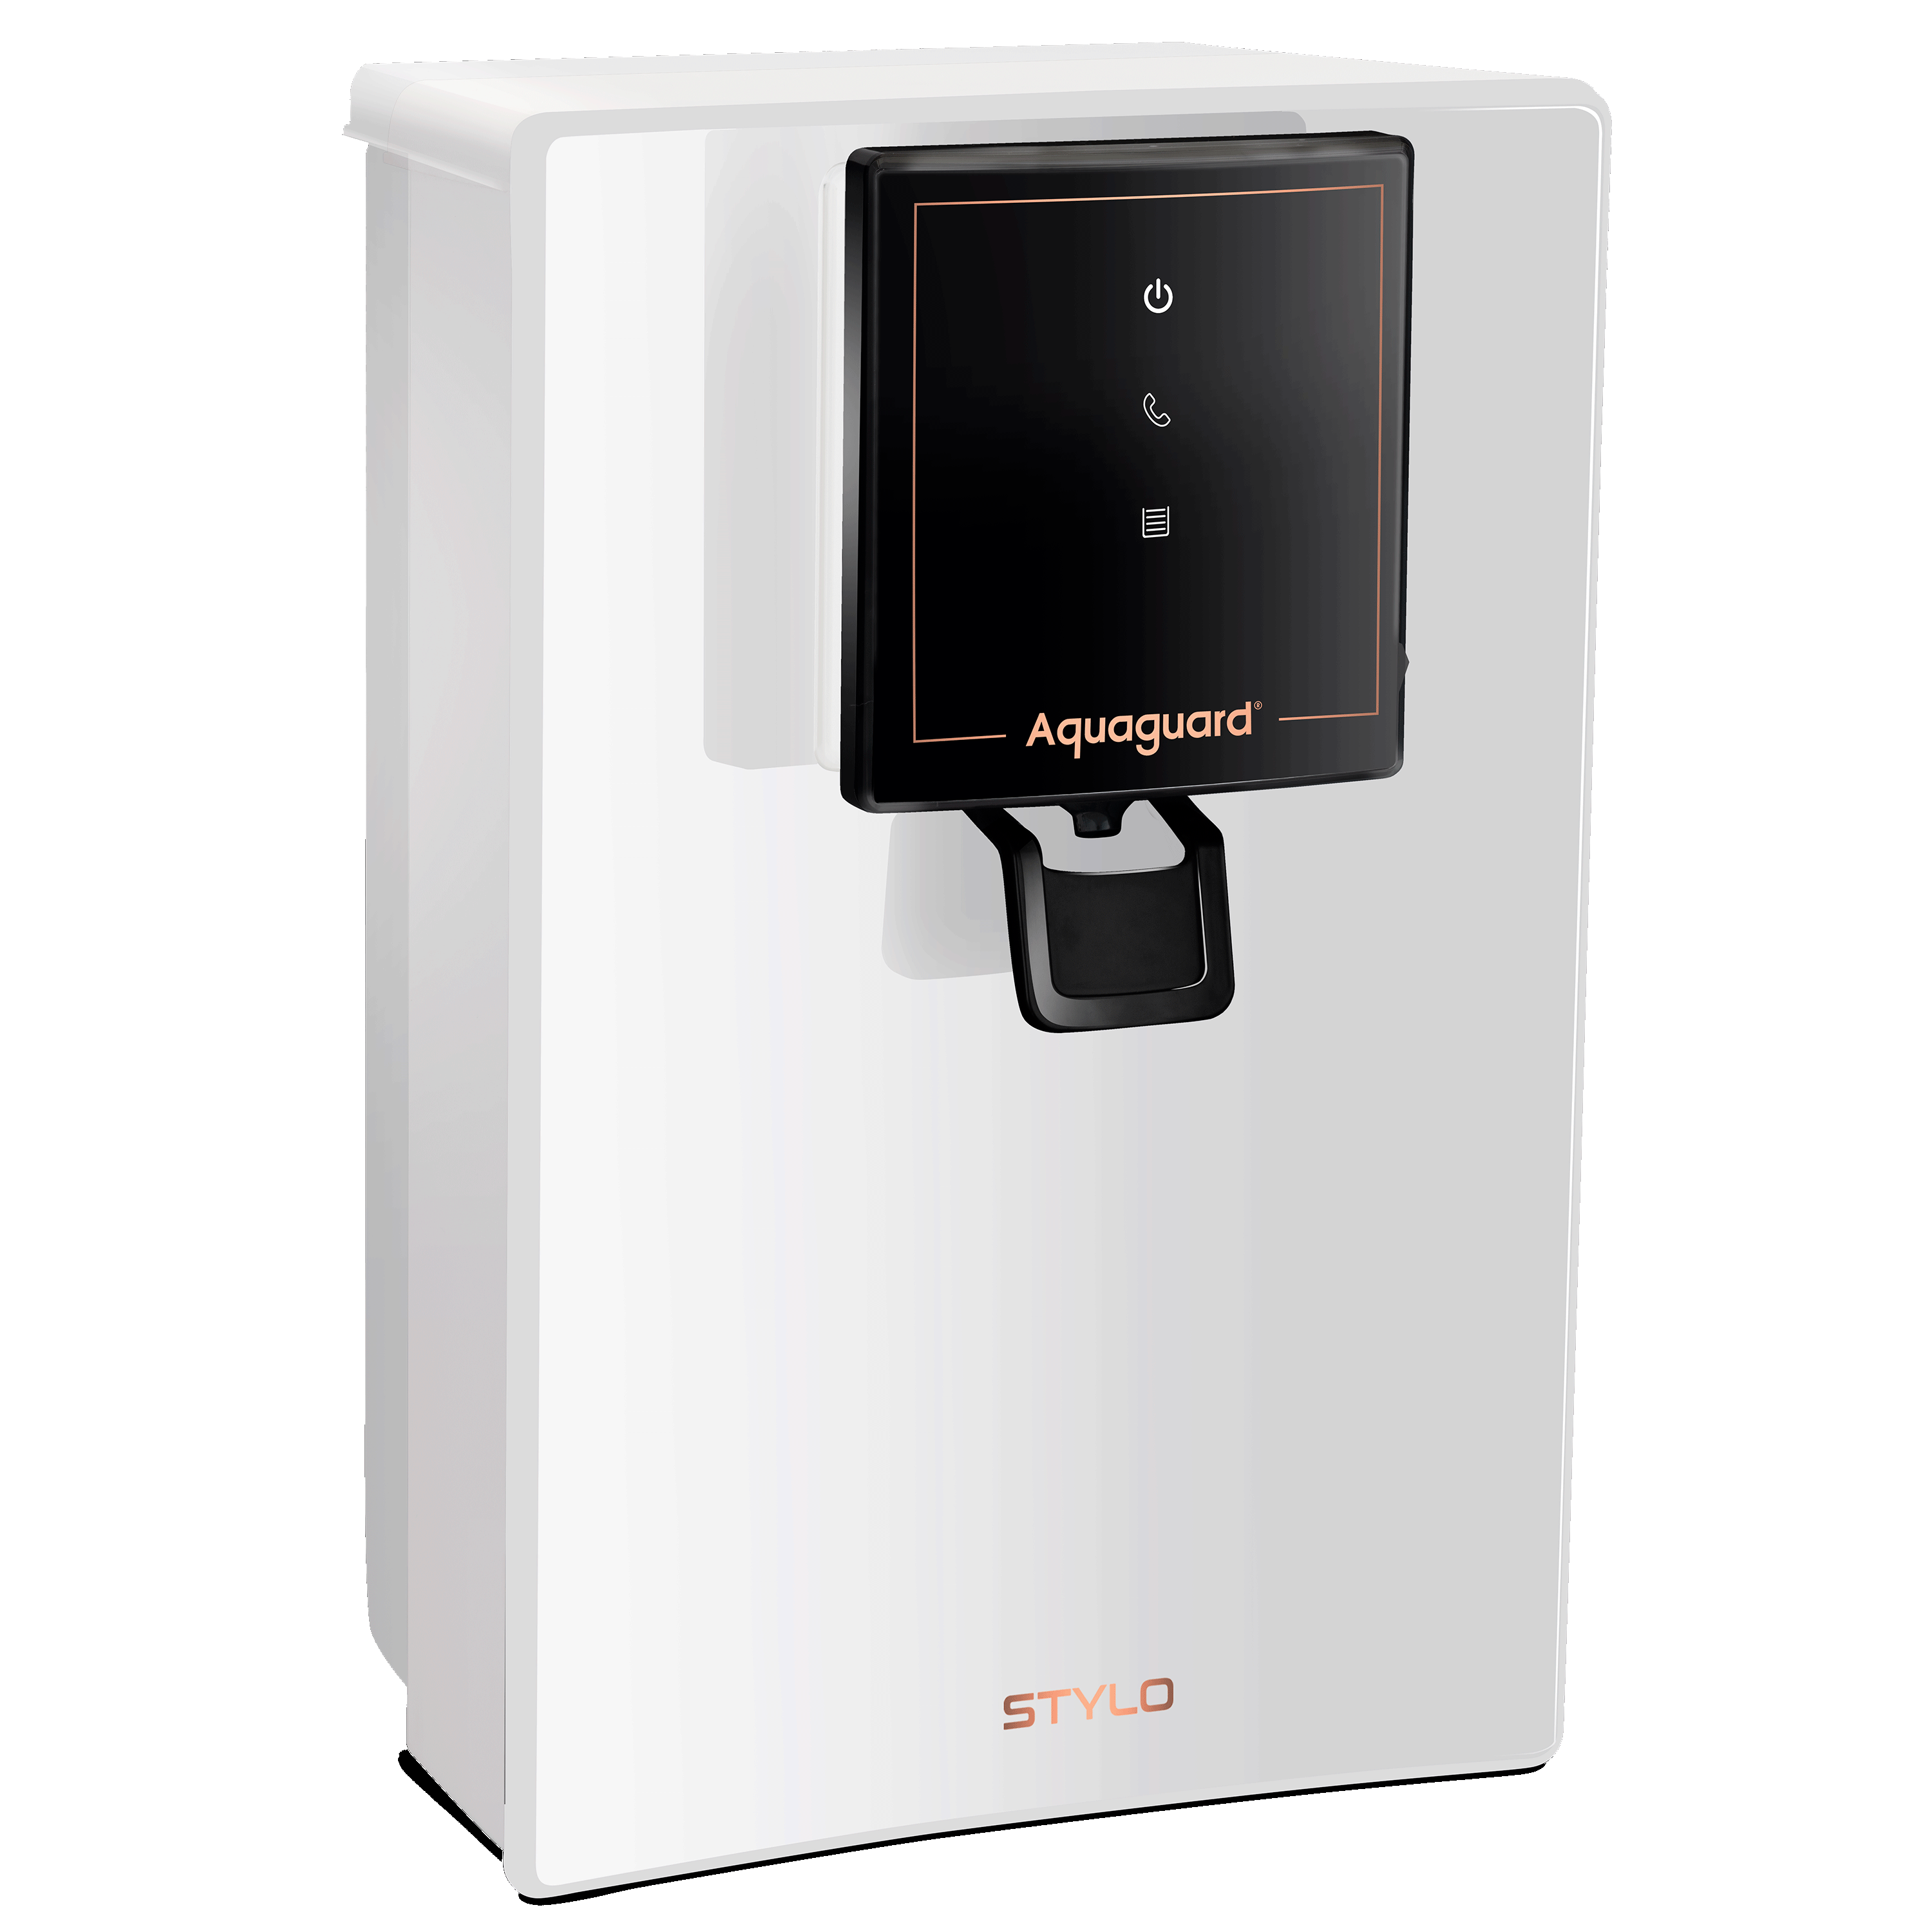 aquaguard - aquaguard Stylo UV + UF Electrical Water Purifier (Active Copper Technology, GWPDSTUUF00000, White)